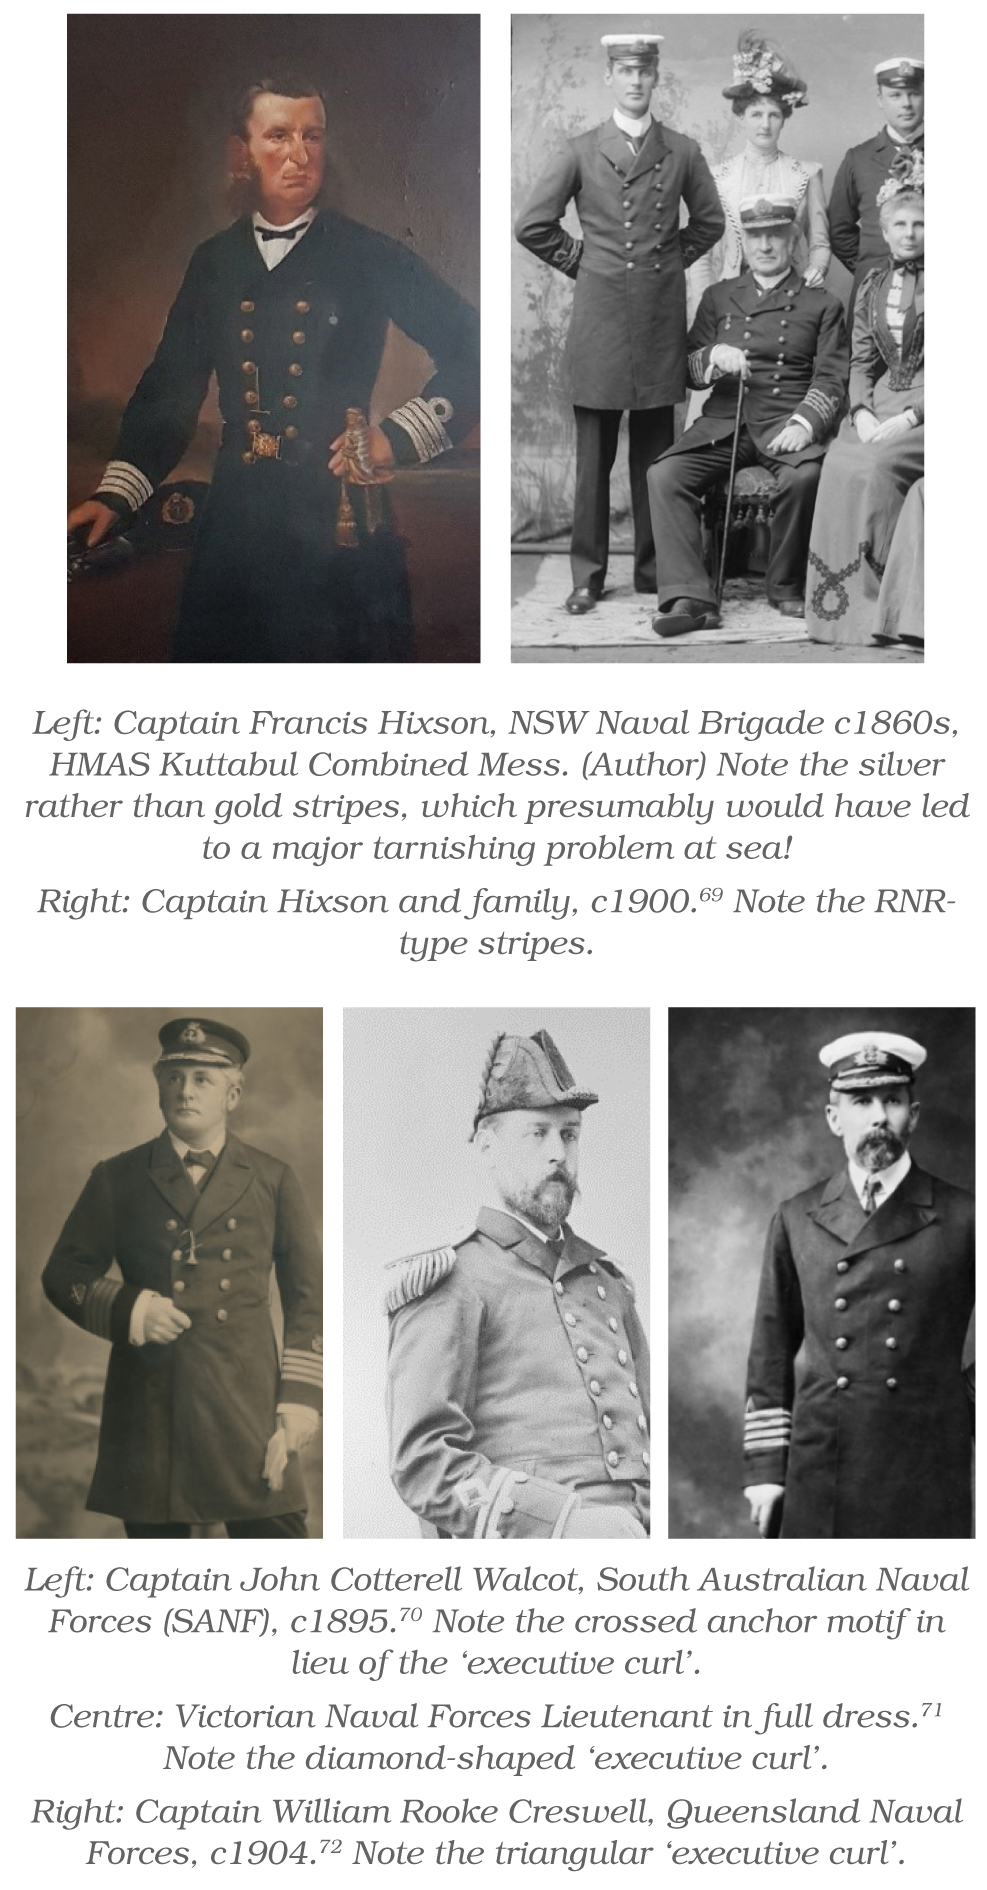 A History Of Australian Navy Health Officer Uniforms And Ranks